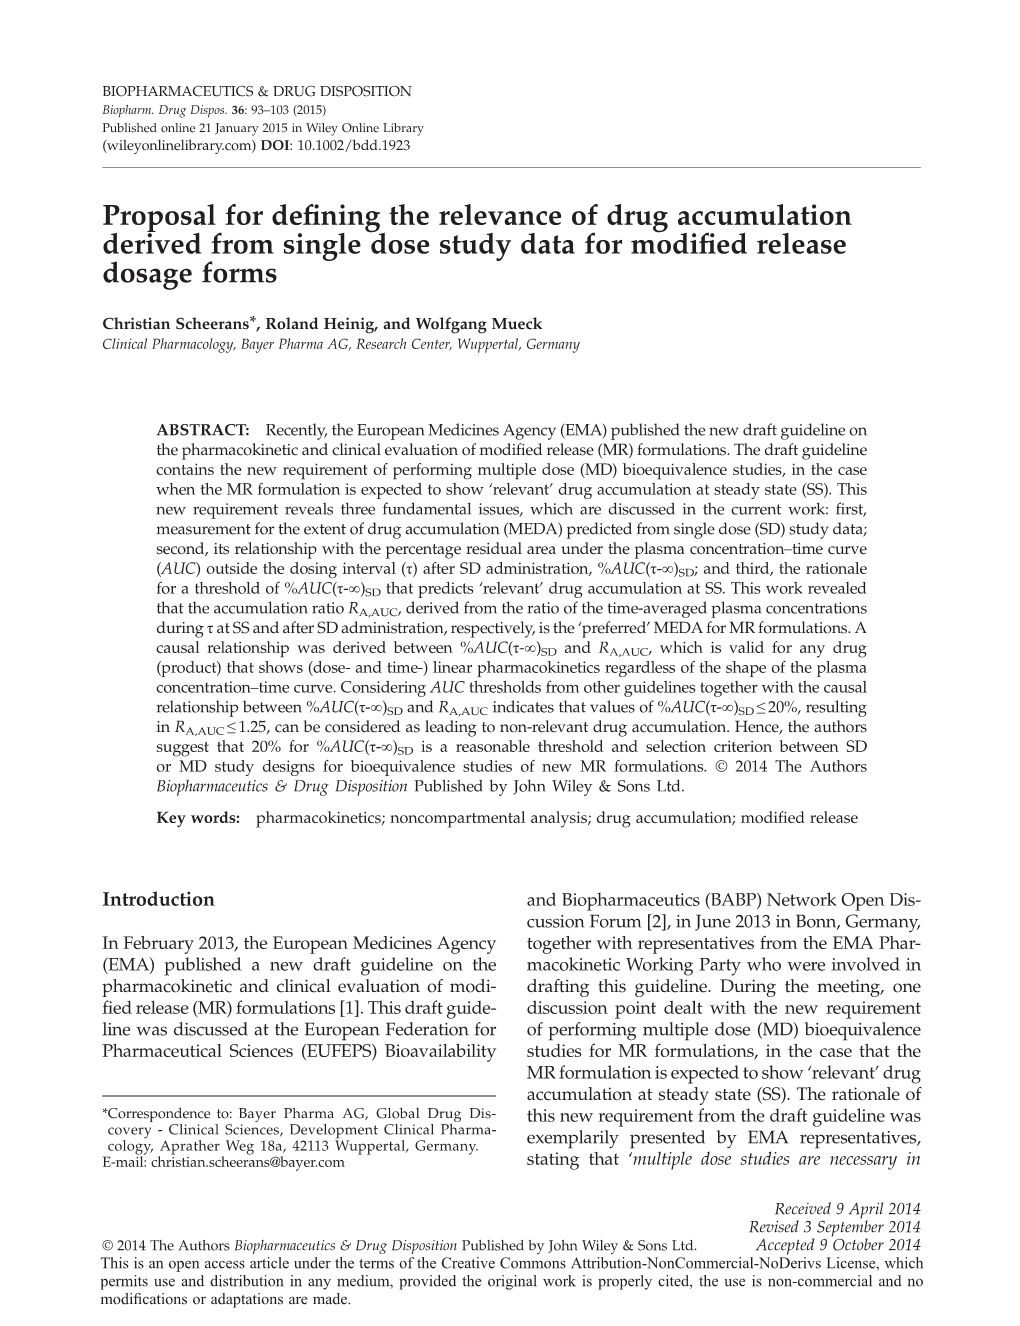 Proposal for Defining the Relevance of Drug Accumulation Derived From